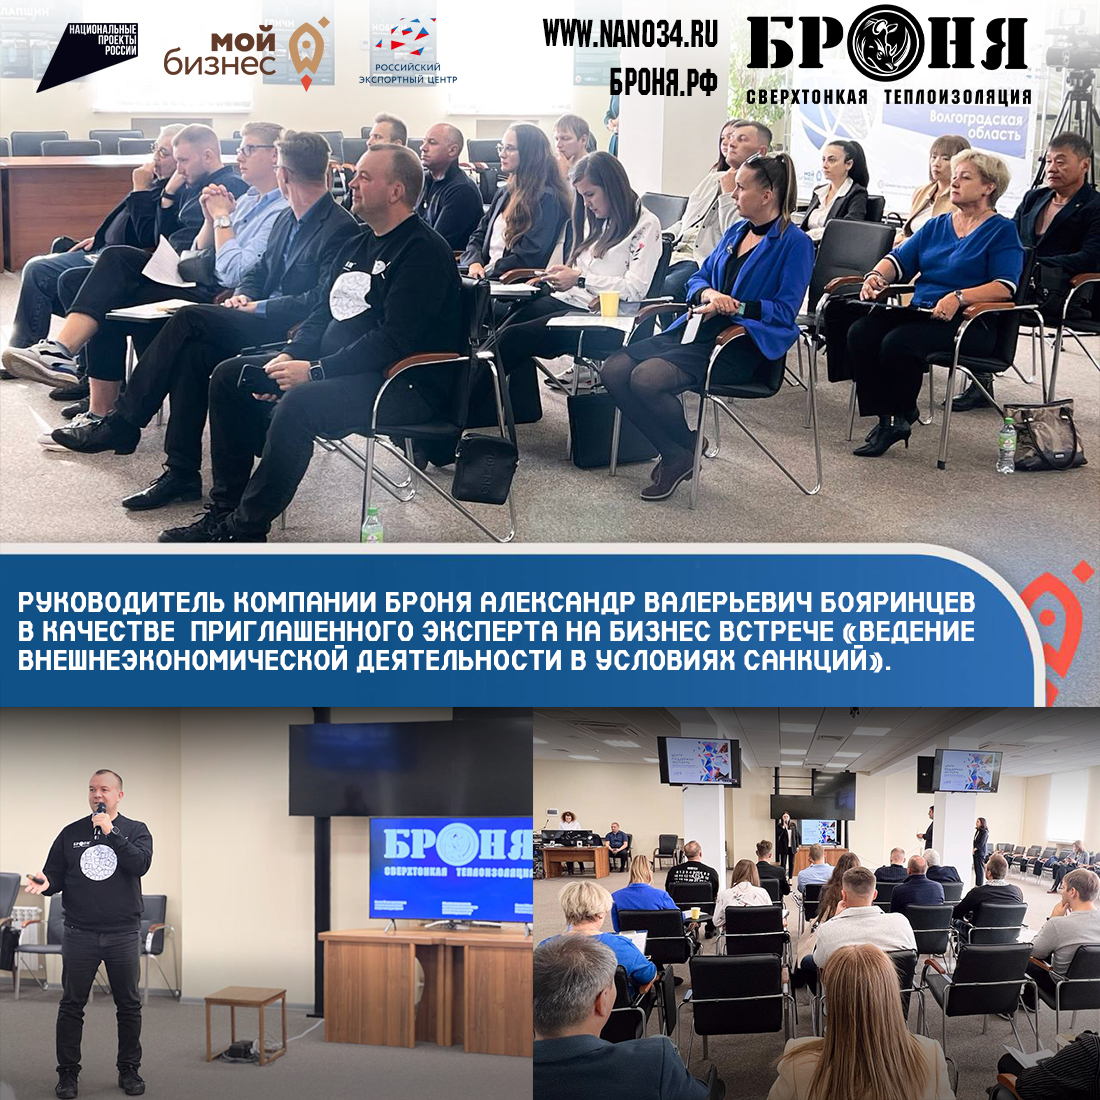 The head of the company Bronya -Alexander Valeryevich Boyarintsev as an invited expert at the business meeting "Conducting foreign economic activity under sanctions". (photo, presentation)